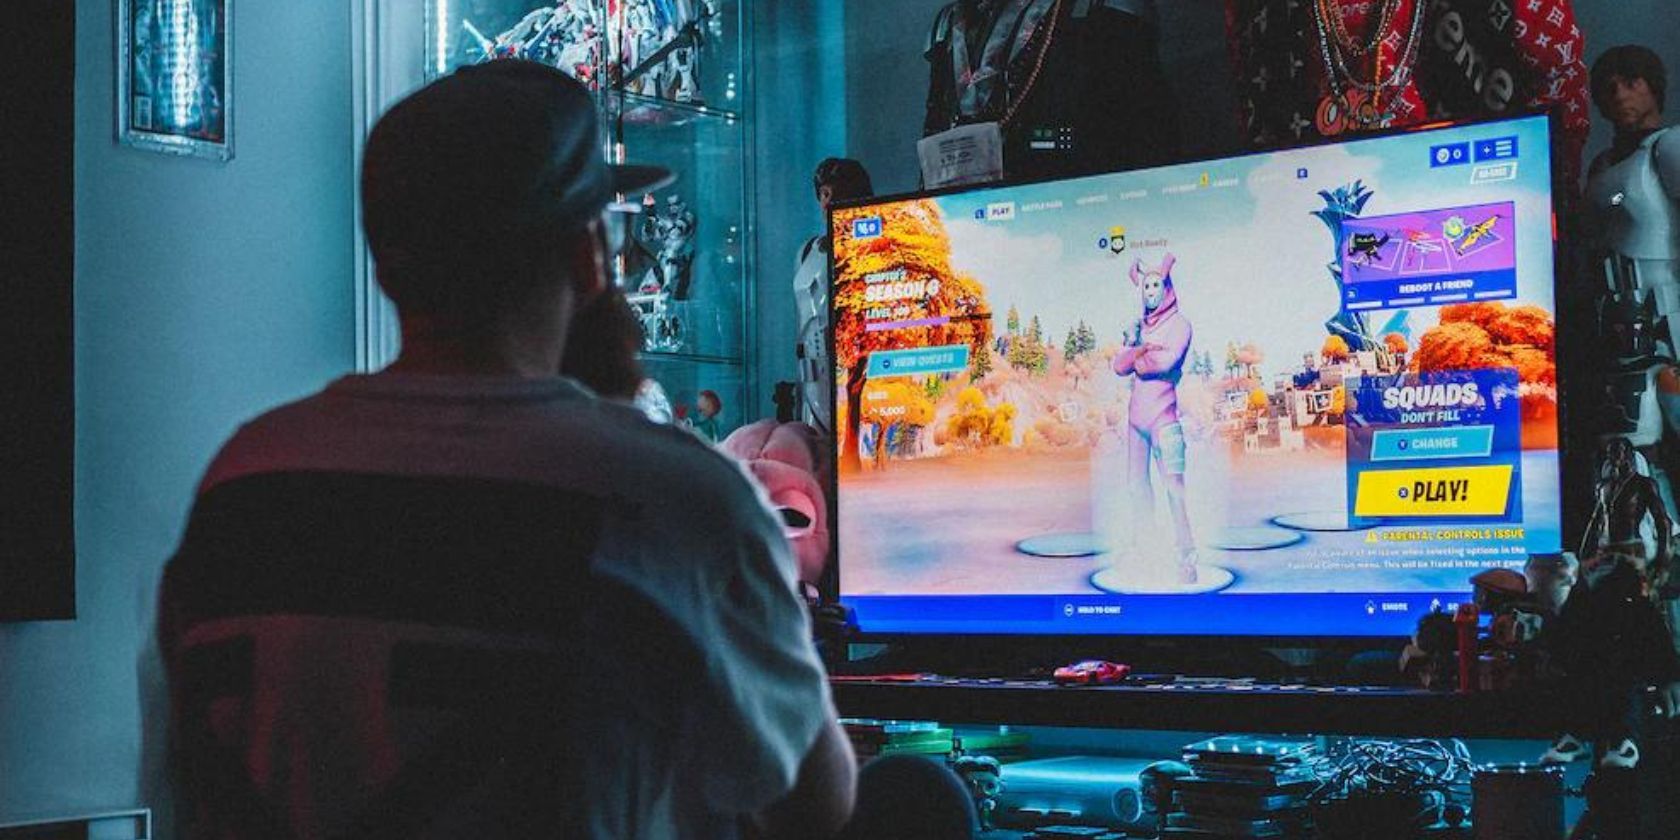 Man playing Fortnite in the arcade